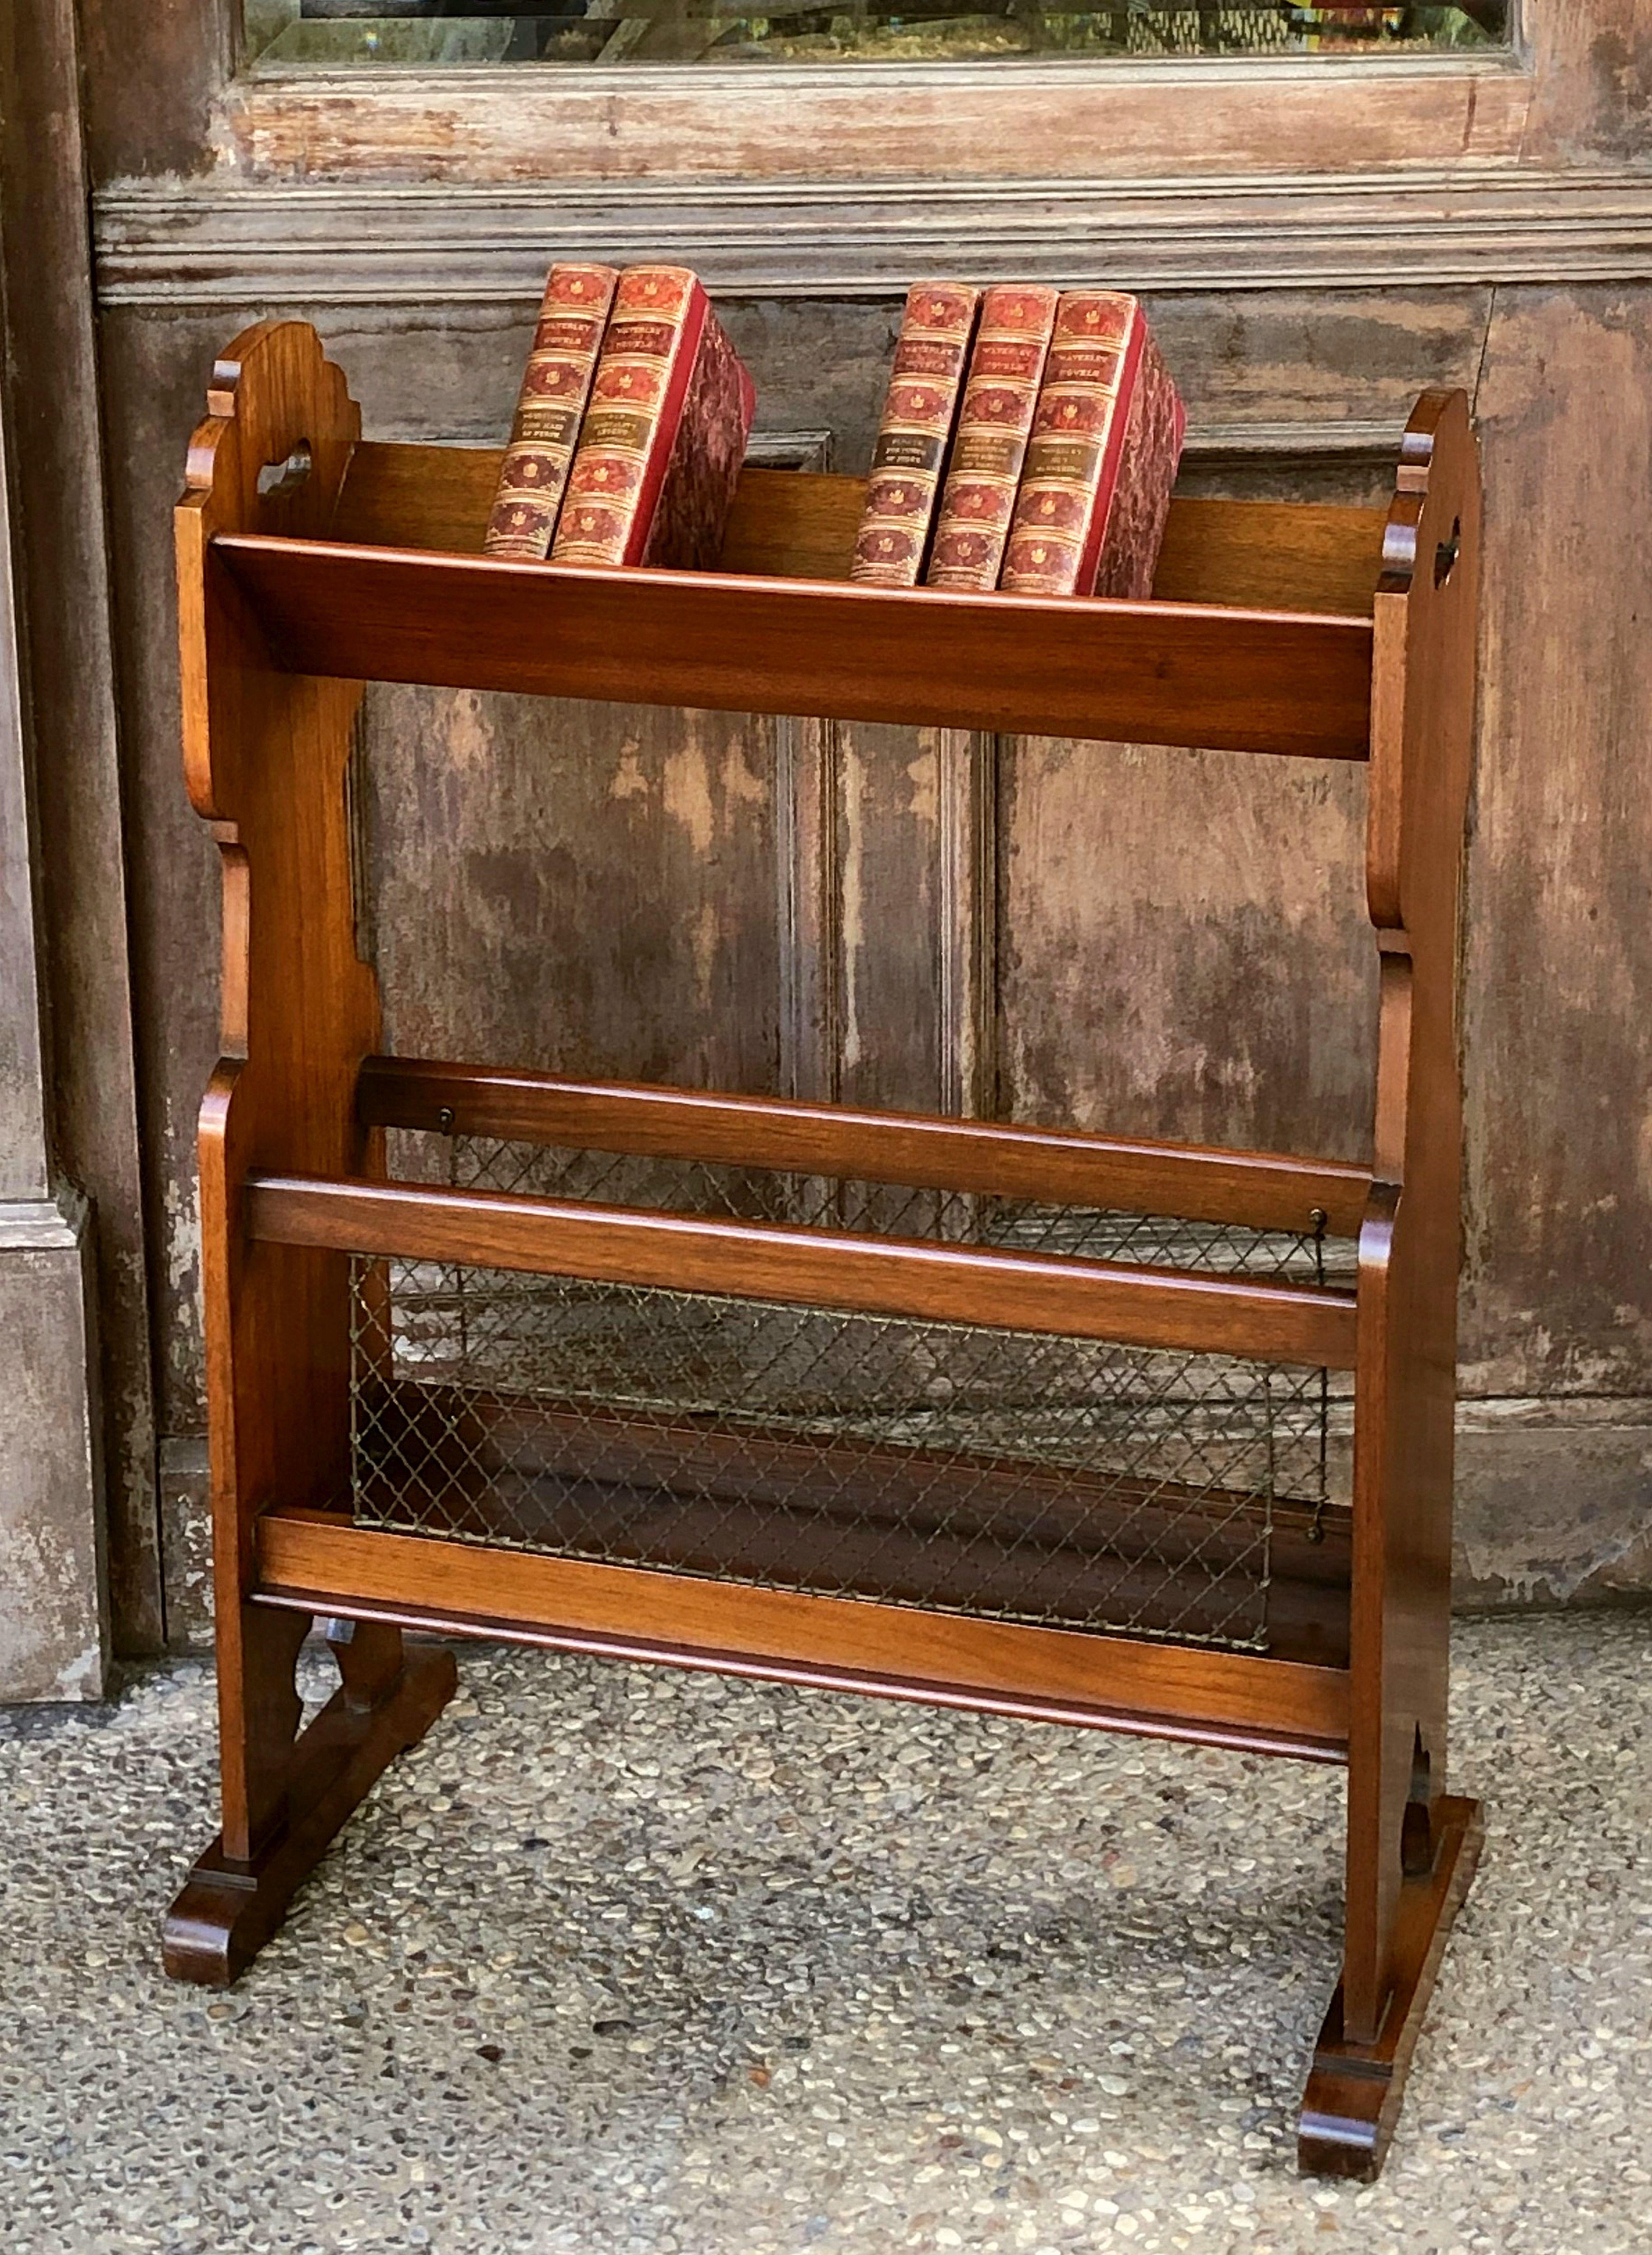 A handsome English two-tiered book trough or library book stand of walnut, from the Edwardian era, featuring a canted upper tier over a flat bottom tier enclosed by a brass grille, where magazines or other items can be stored.